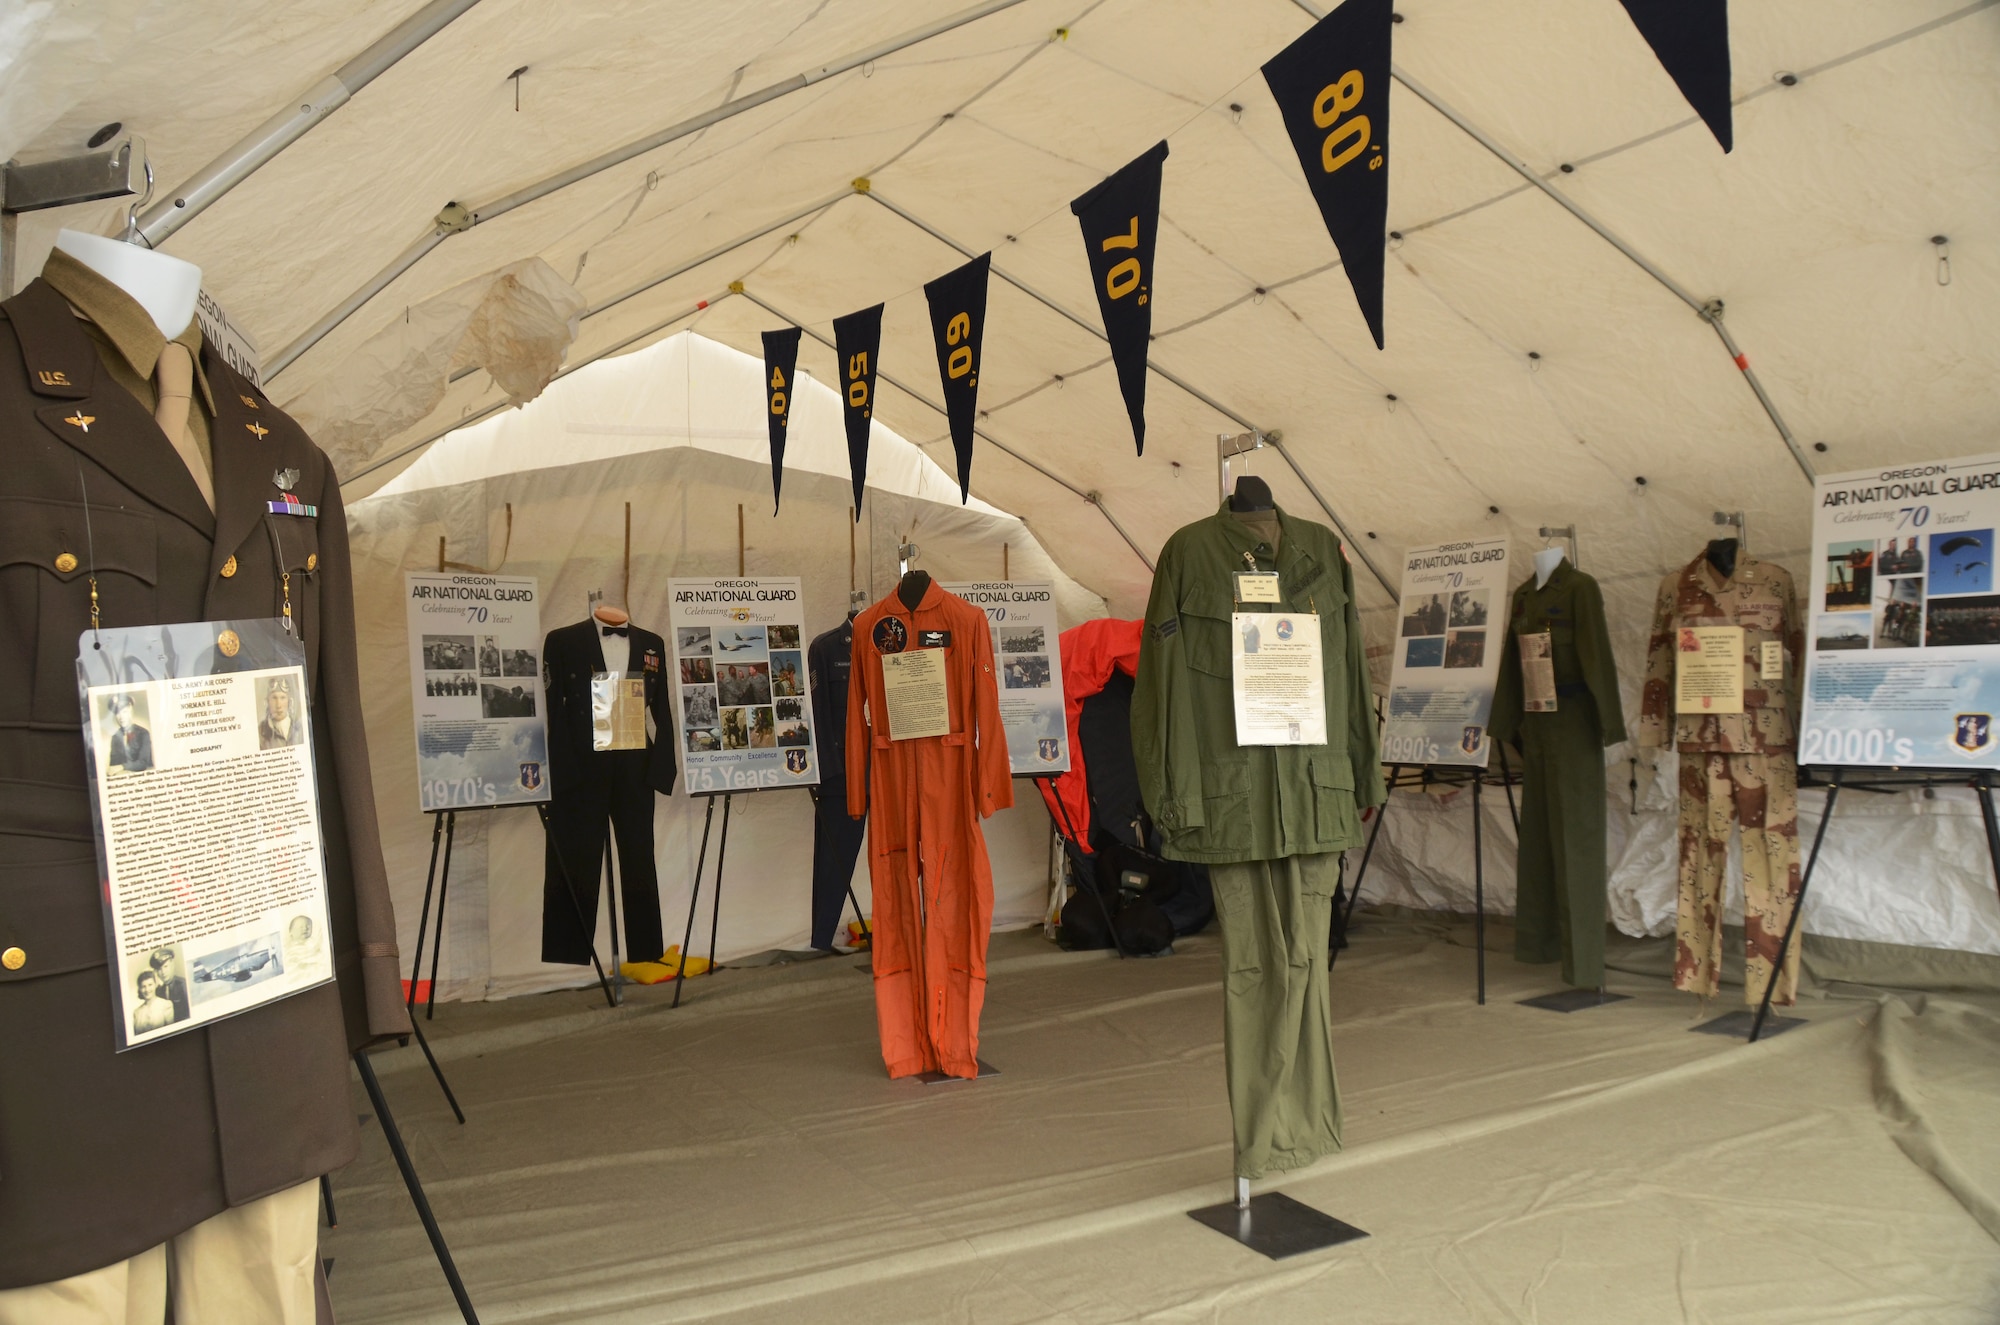 A military tent from the 142nd Fighter Wing helps display historical uniforms and photographs to celebrate the 75th Anniversary of the Oregon Air National Guard, Hillsboro, Ore., Aug. 7, 2016. (U.S. Air National Guard photo by Tech. Sgt. John Hughel, 142nd Fighter Wing Public Affairs/Released).